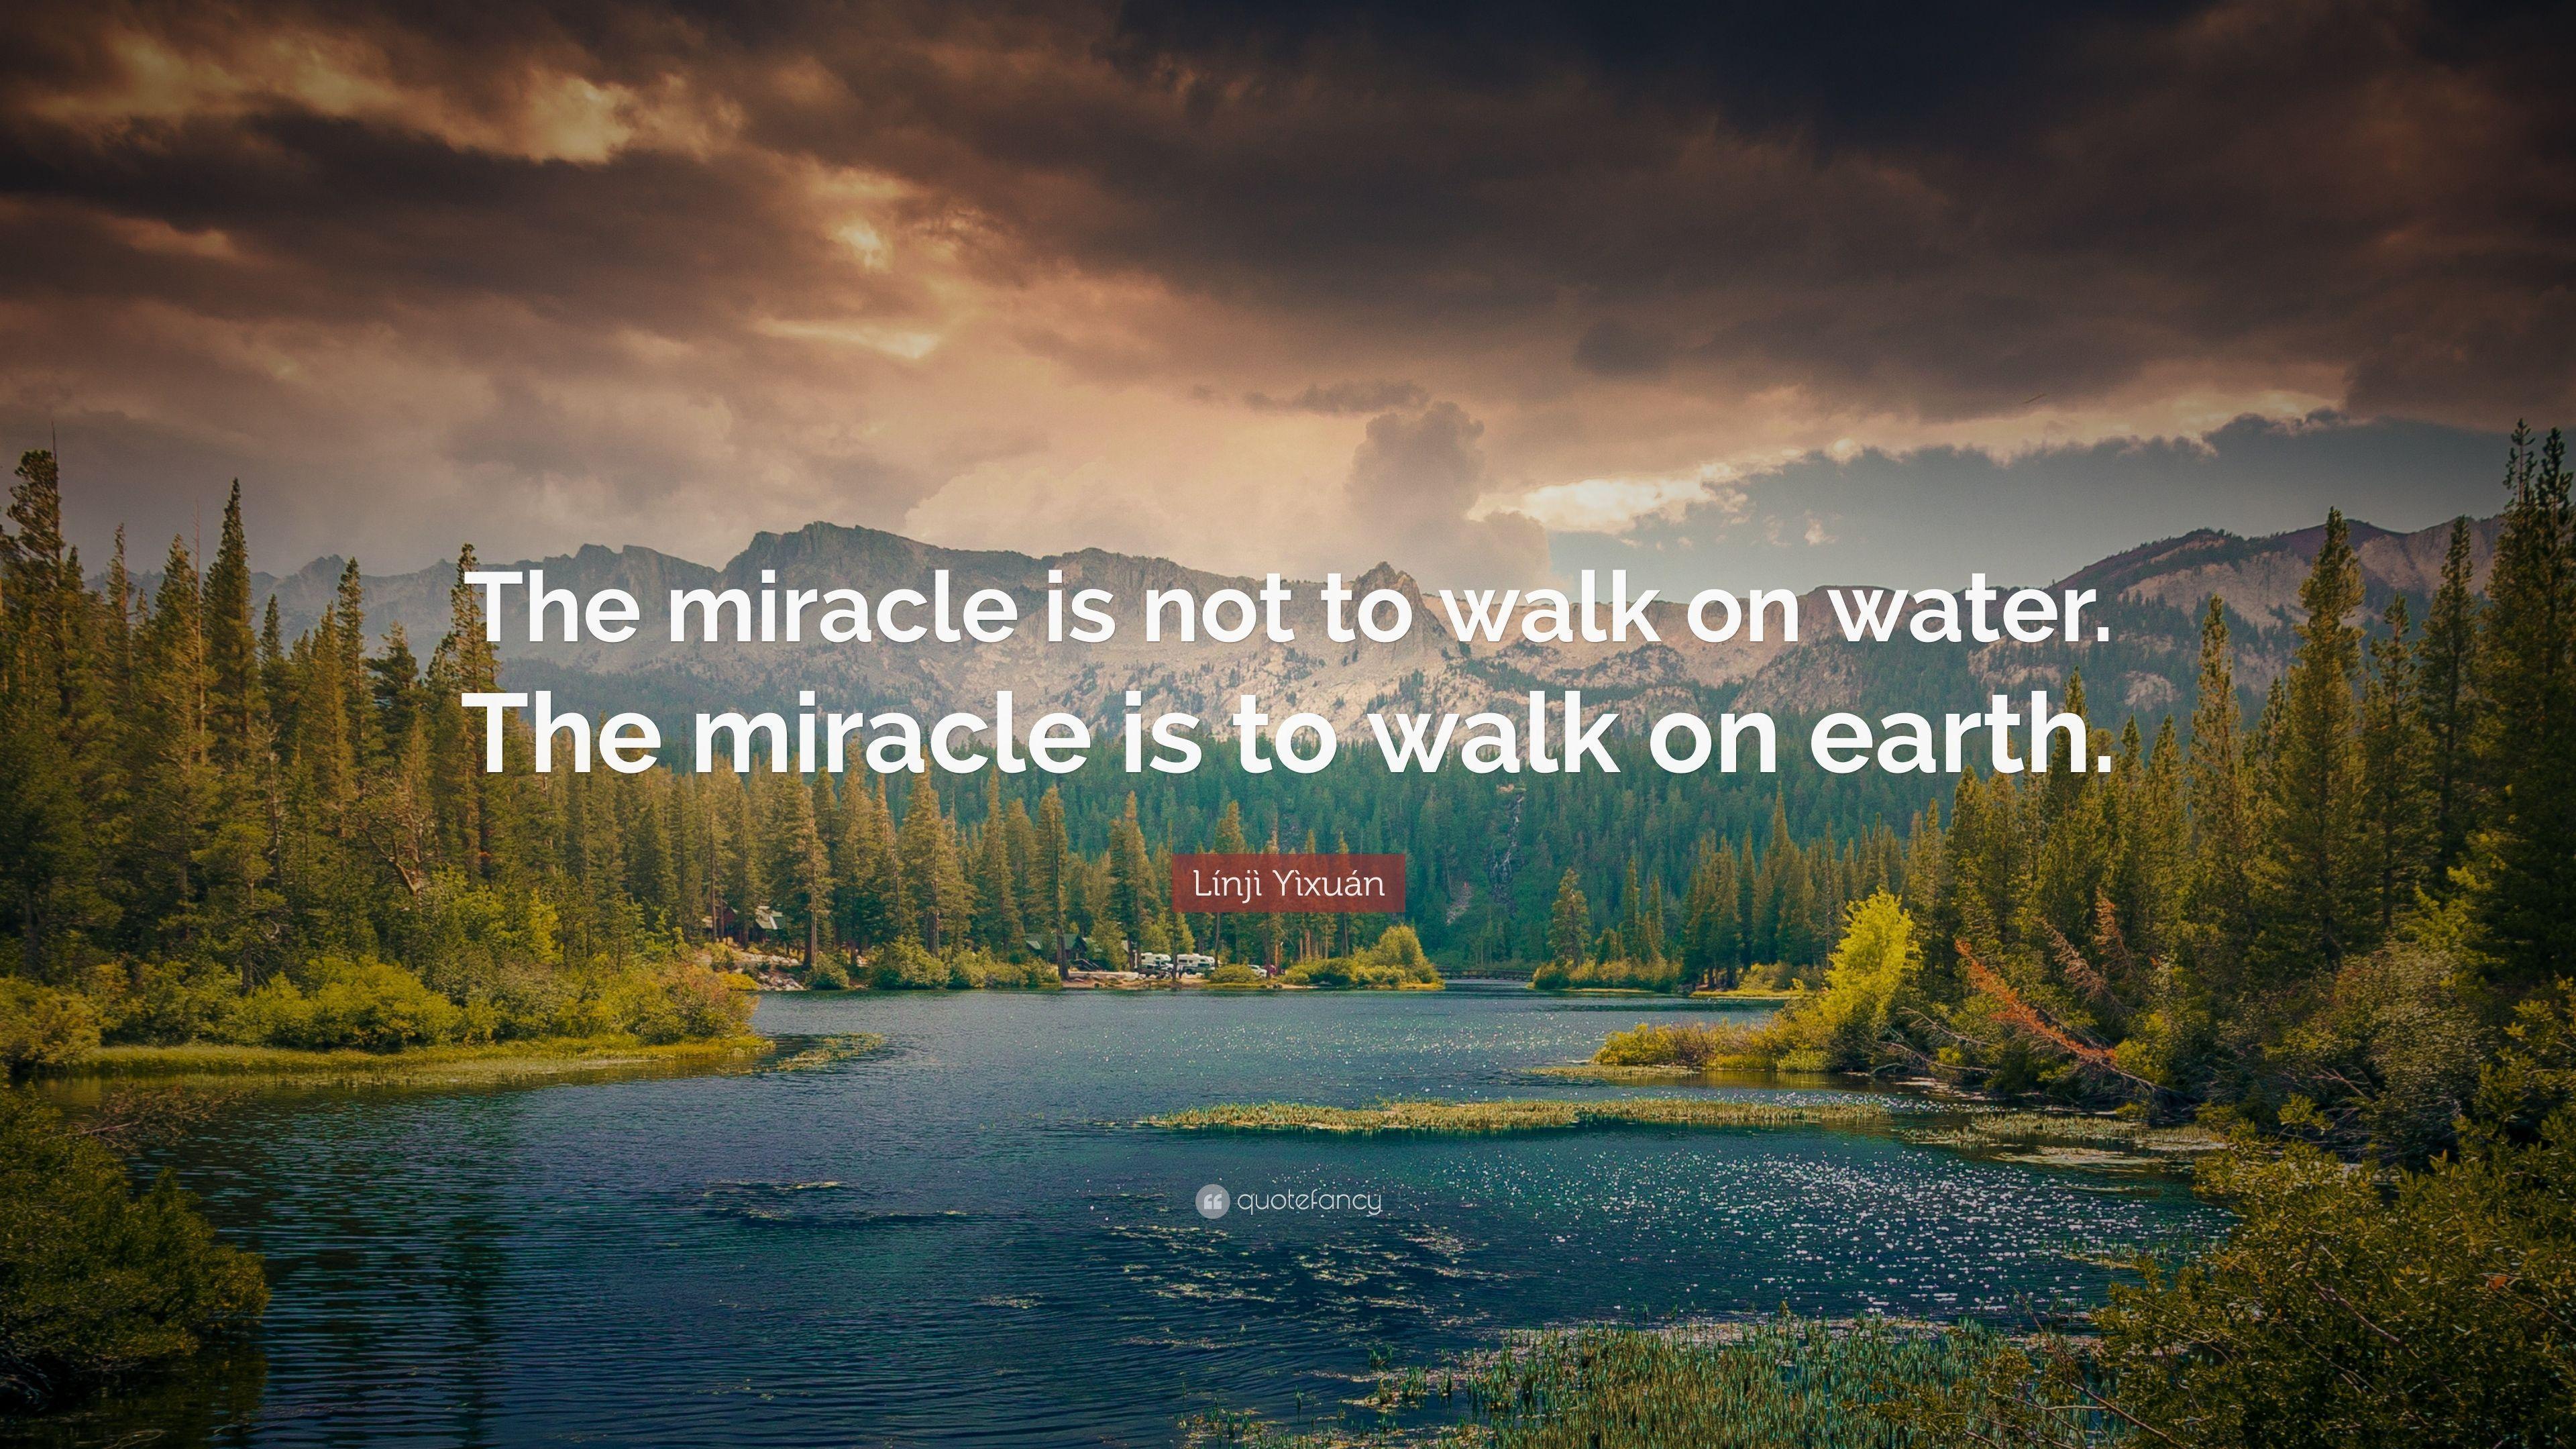 Línjì Yìxuán Quote: “The miracle is not to walk on water